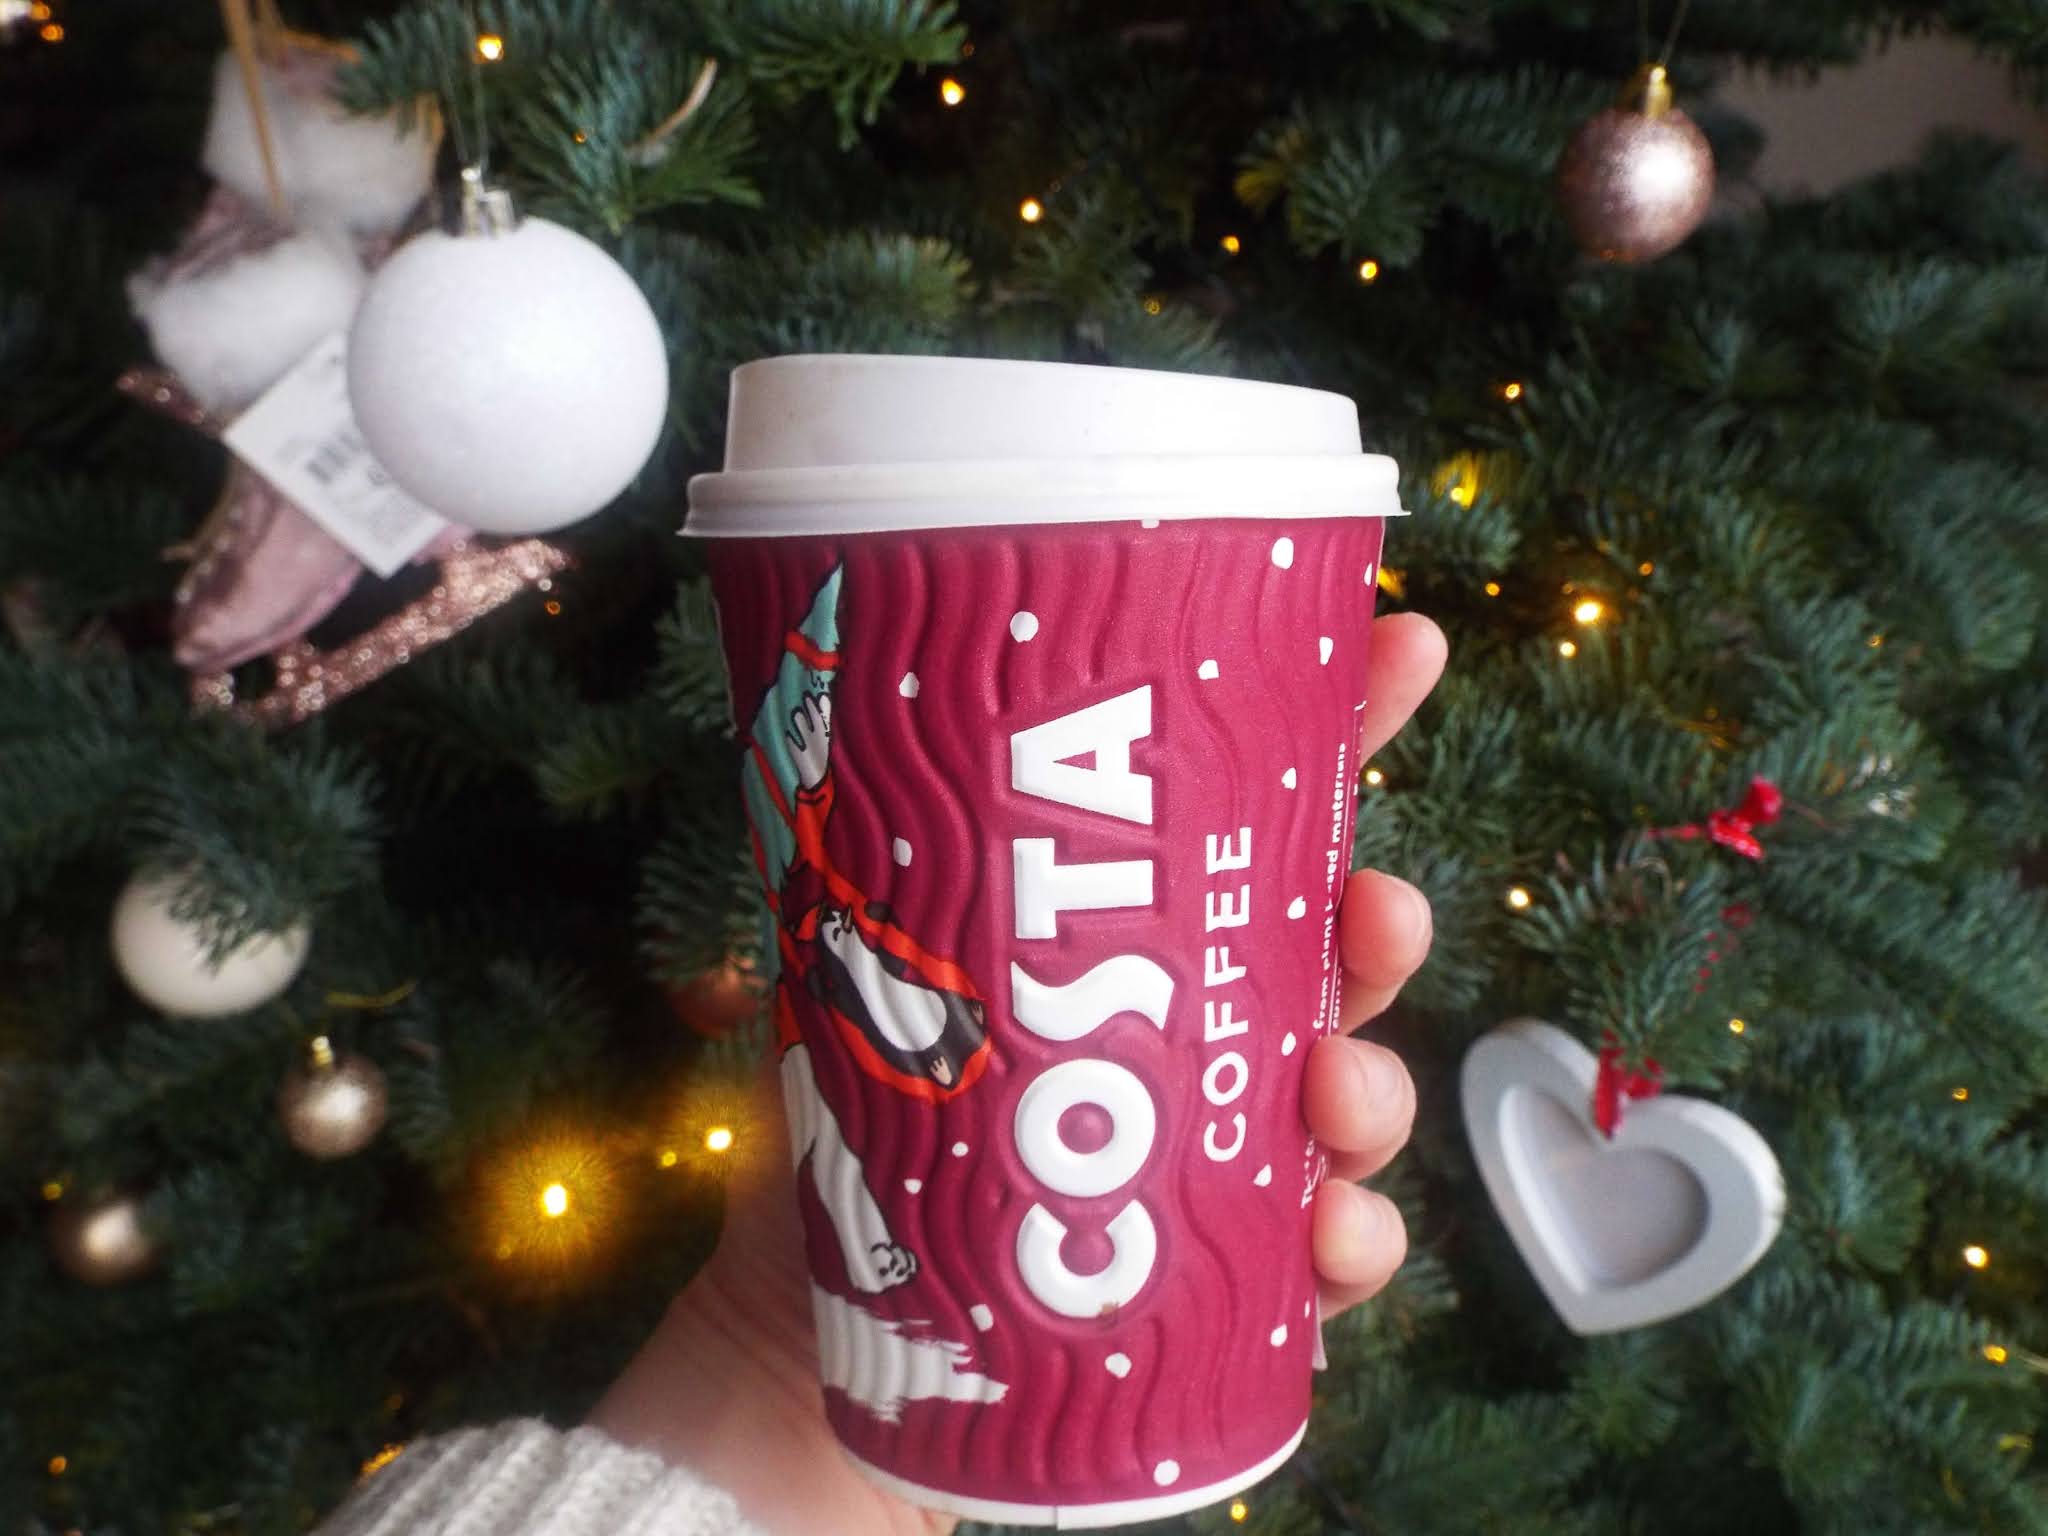 Secret recipe vegan Costa Christmas drink, displayed in Costa Christmas Cup with polar bear carrying Christmas tree. Held up in front of cosy, warm white light Christmas tree, with an arm extending wearing a cream chunky knit jumper.